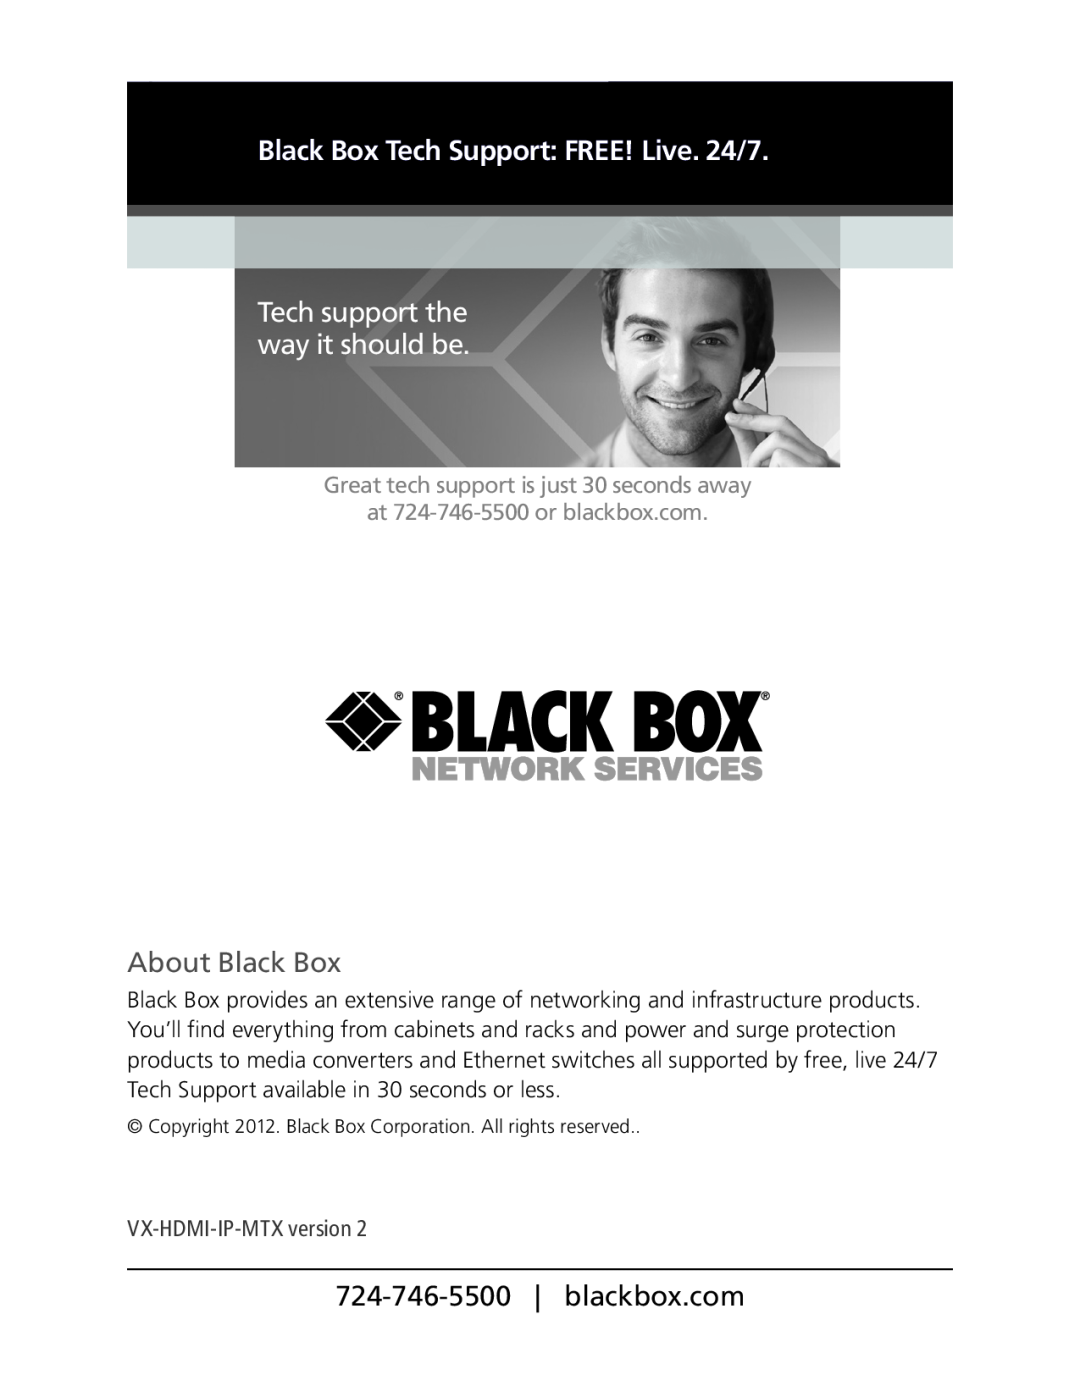 Black Box VX-HDMI-IP-VRX Chapter, Tech support the way it should be, About Black Box, Page 900 724-746-5500 blackbox.com 